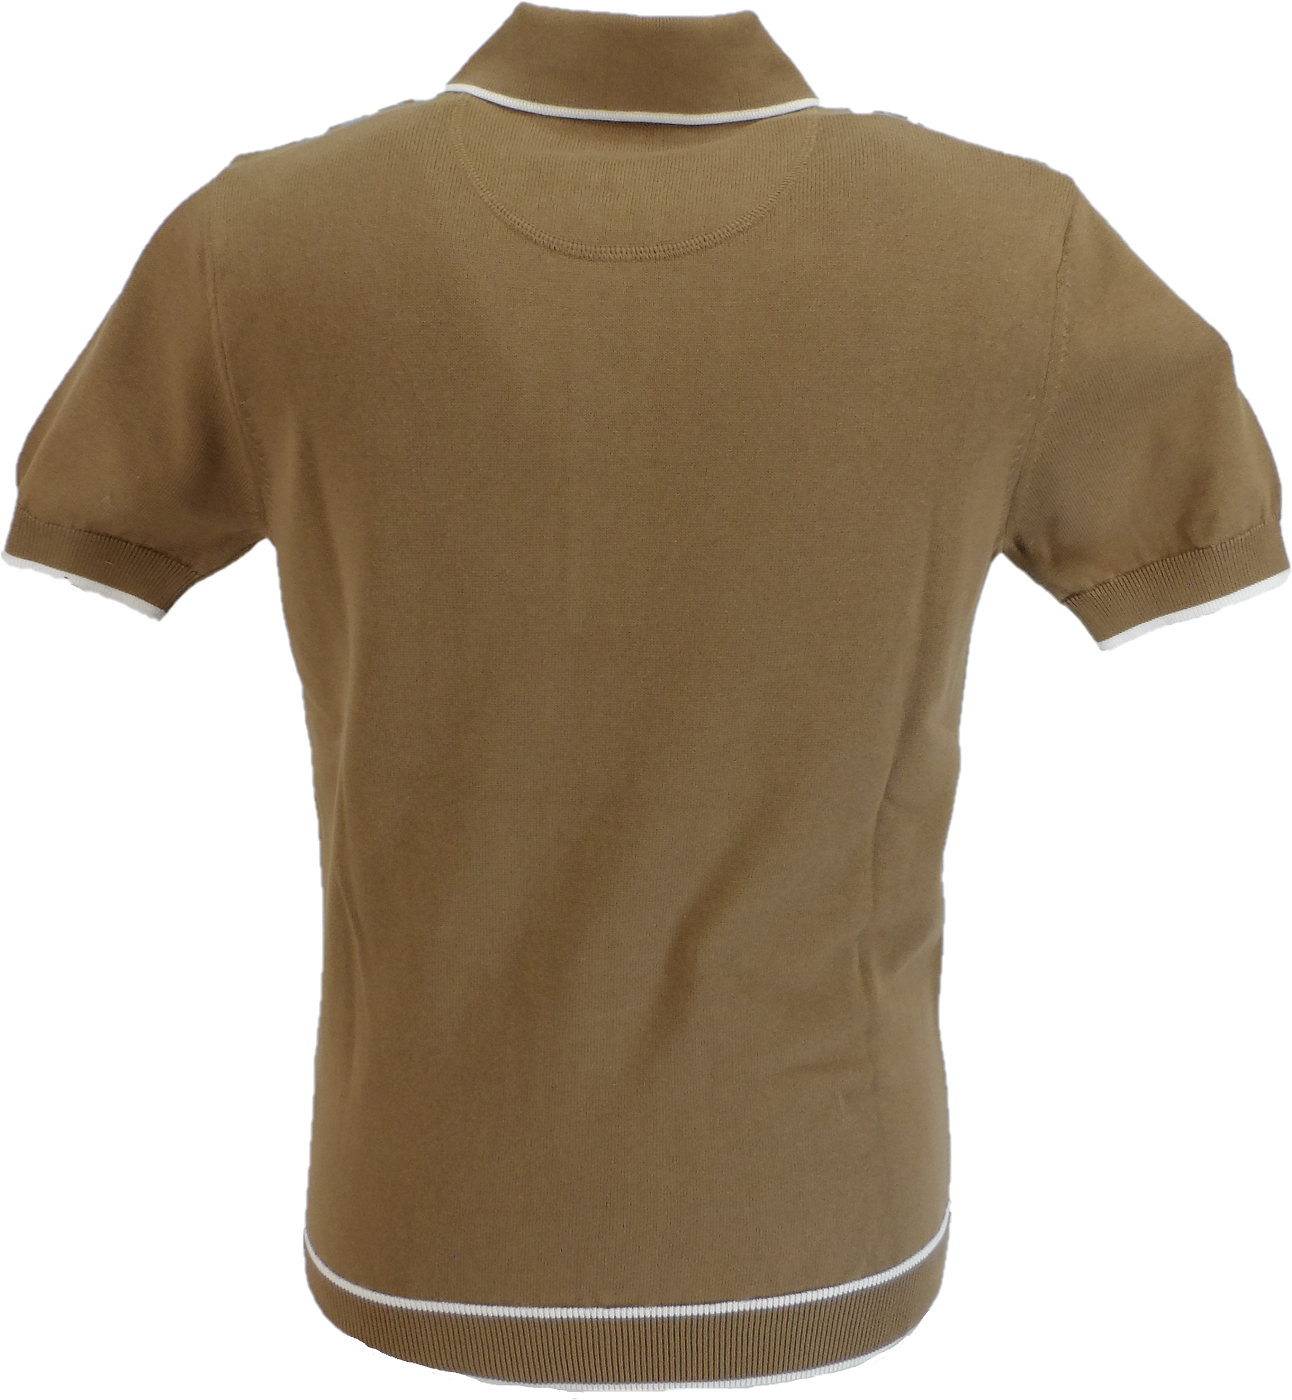 Trojan Mens Camel Brown Squares Cotton Fine Gauge Knitted Polo Shirt